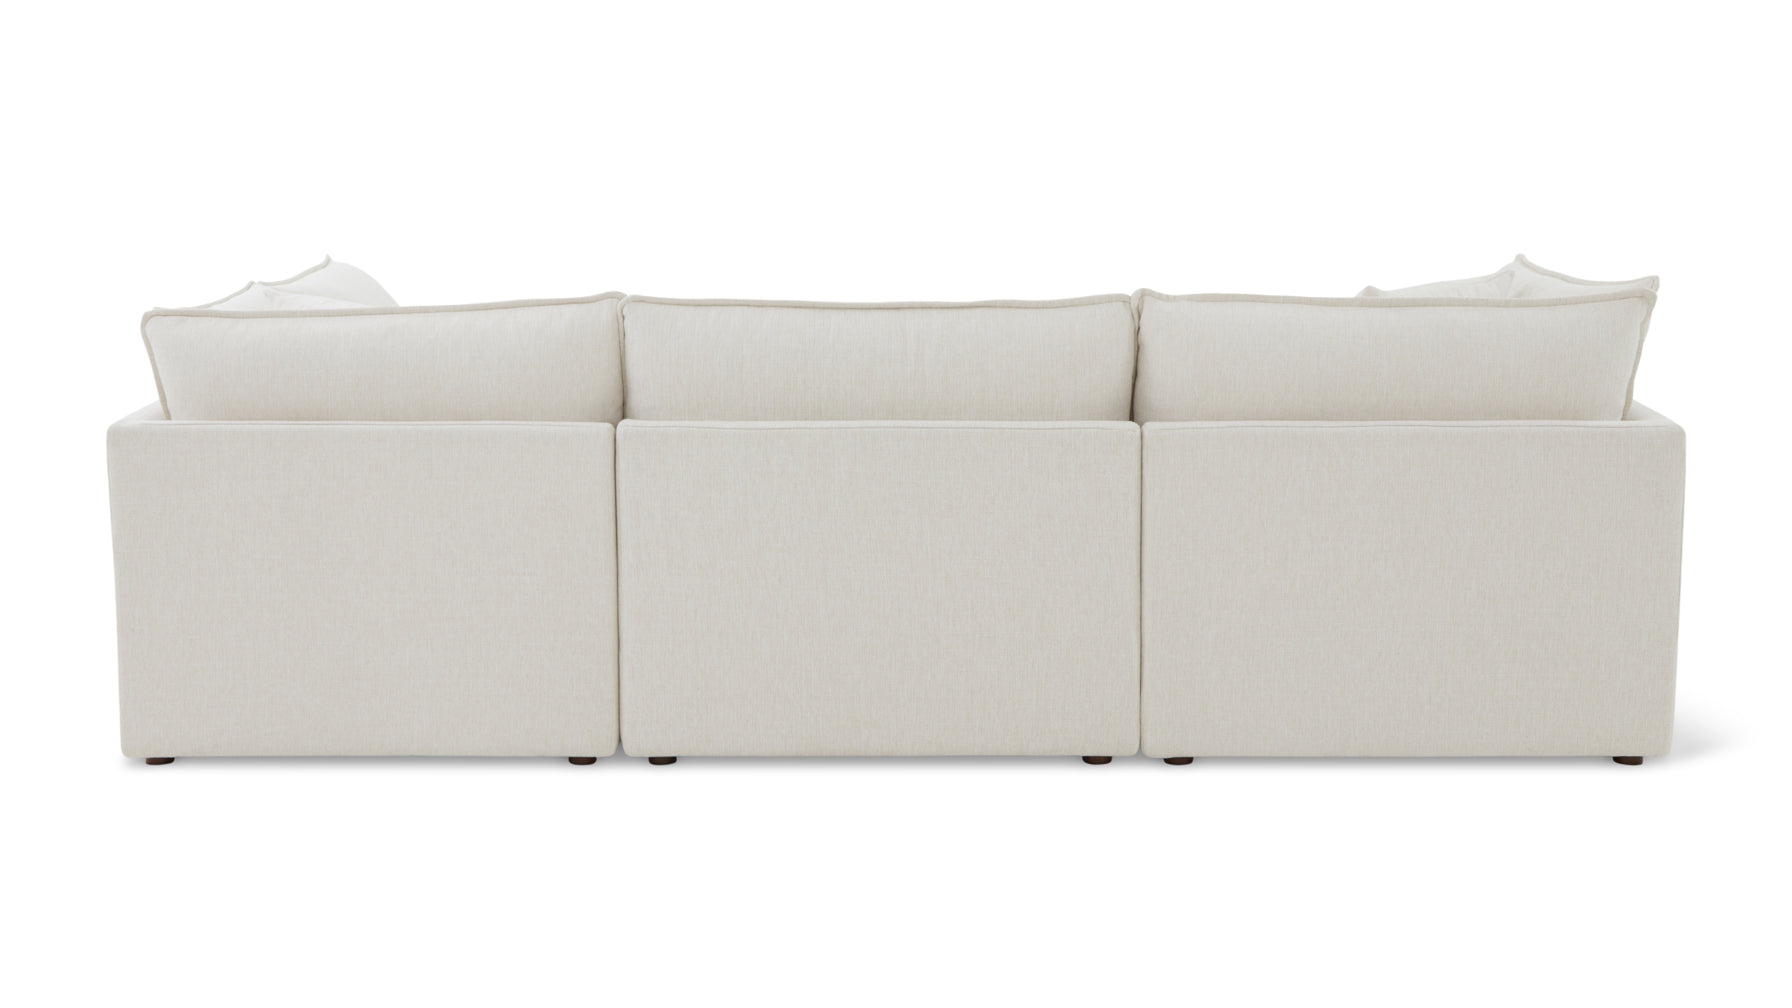 Chill Time 5-Piece Modular Sectional, Birch - Image 7